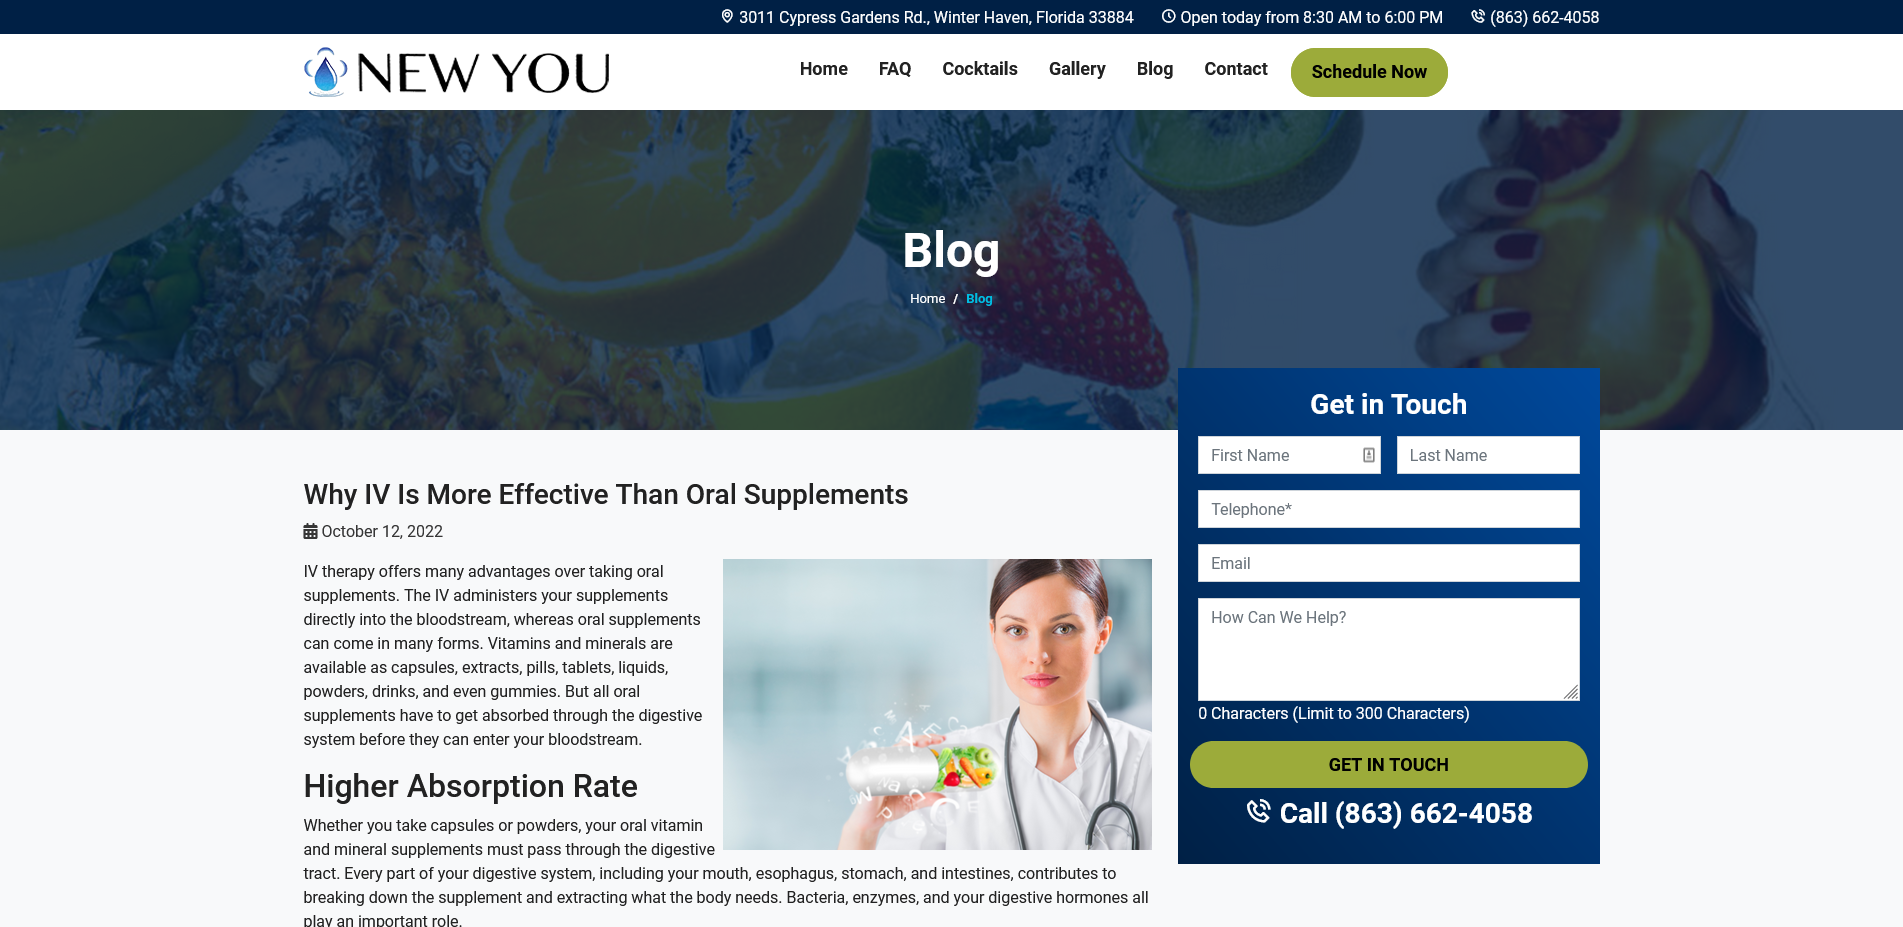 The new you wellness site